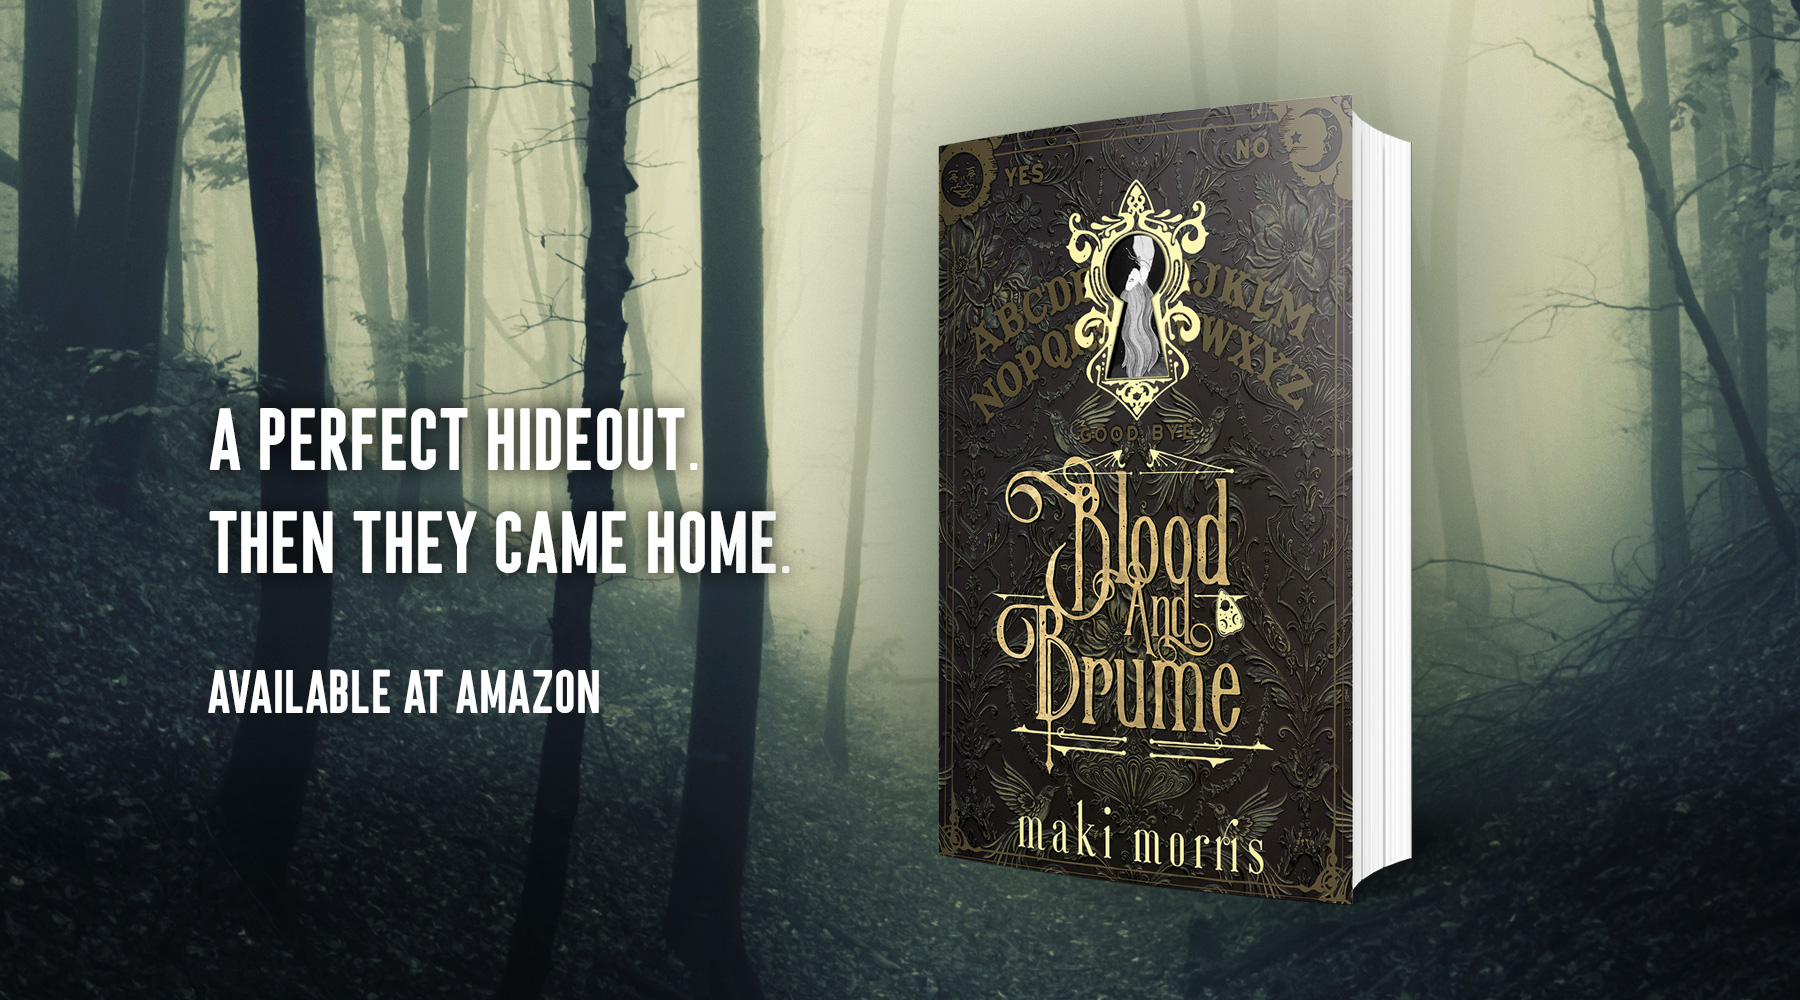 Blood and Brume by Maki Morris is a YA paranormal tale